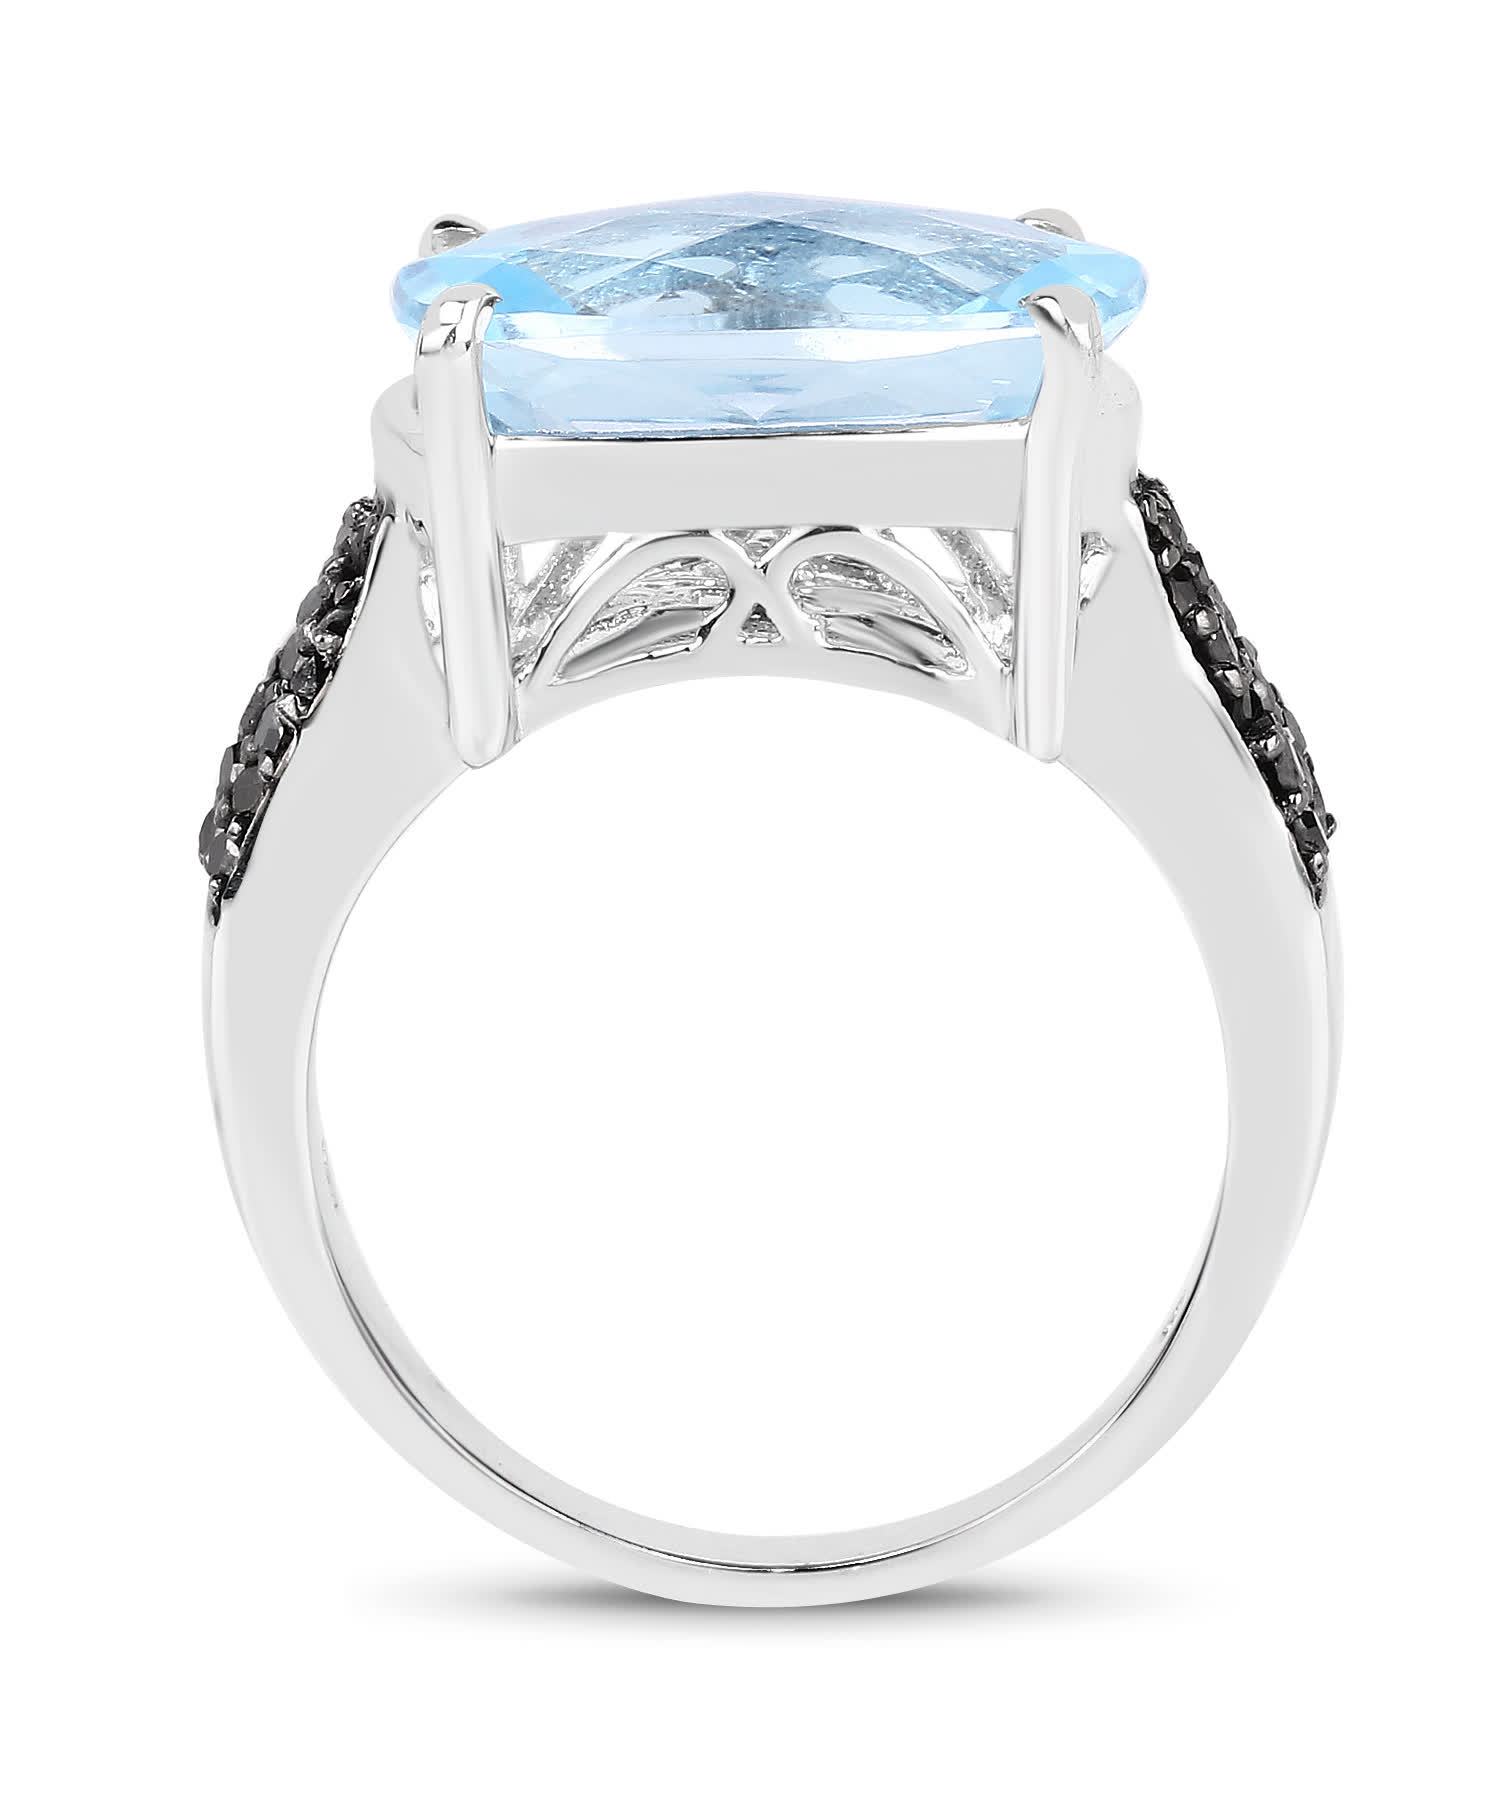 3.96ctw Natural Swiss Blue Topaz and Black Diamond Rhodium Plated 925 Sterling Silver Right Hand Ring View 2